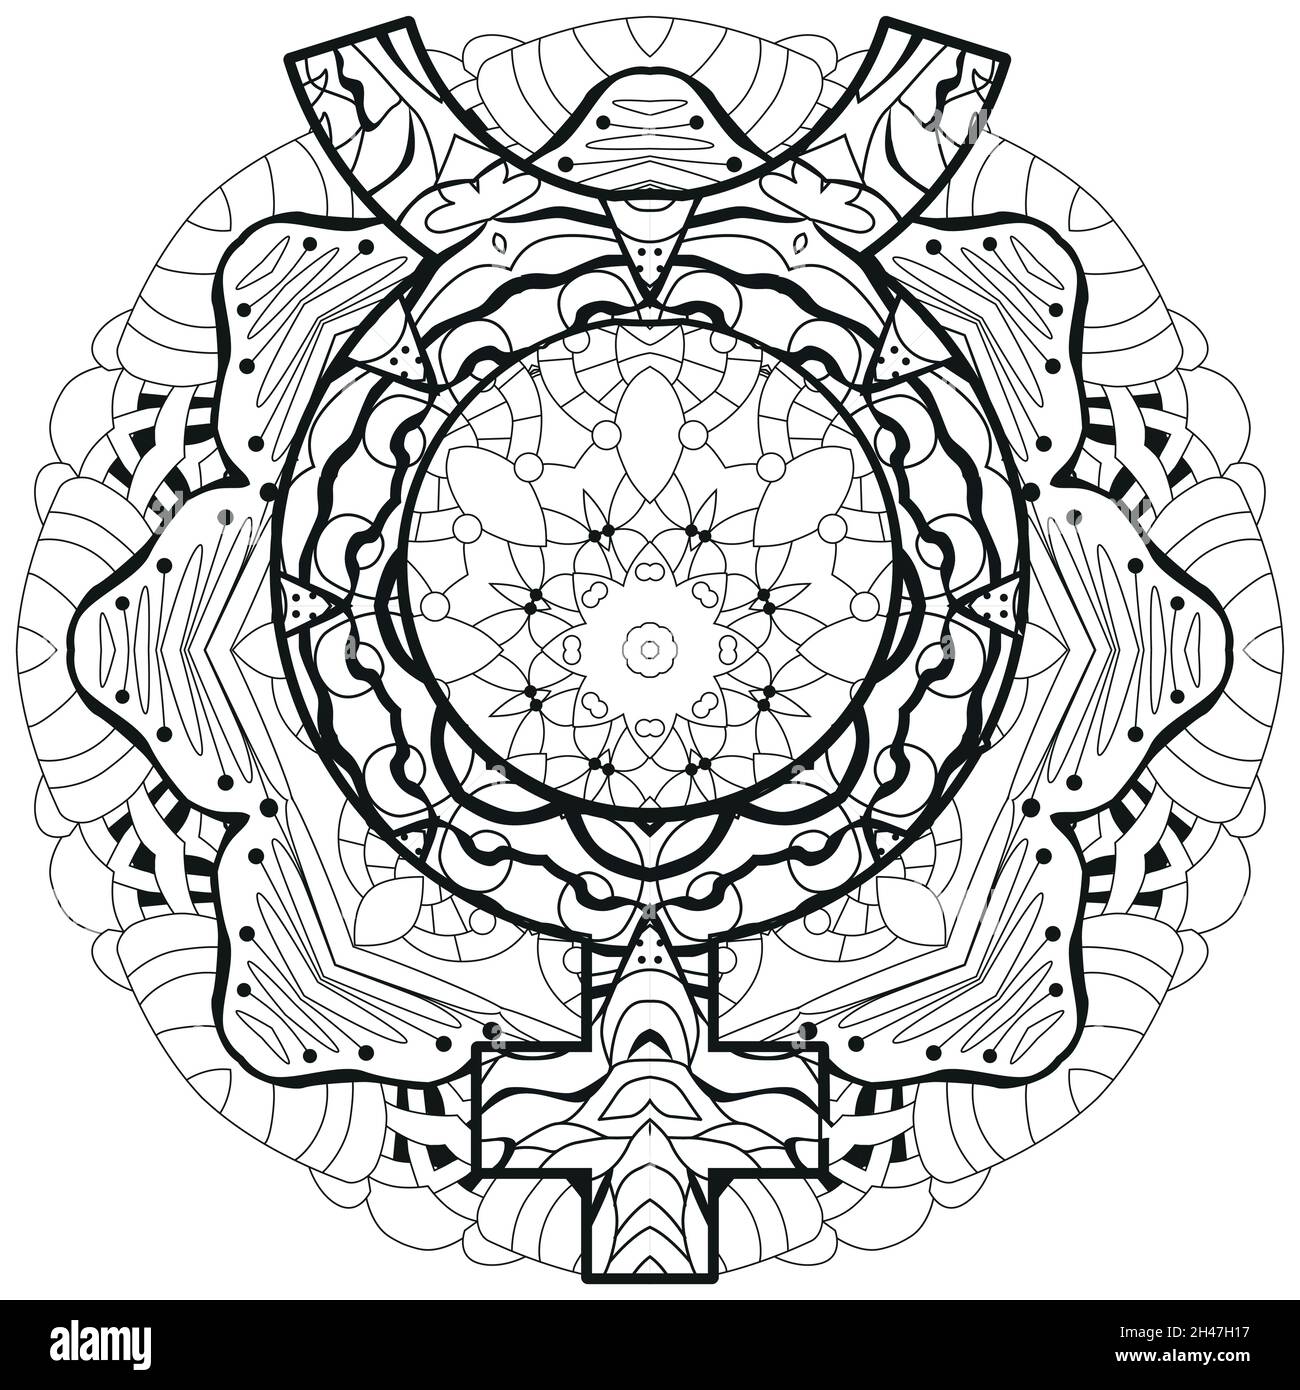 Mercury sign with mandala, astrology concept art. Tattoo design. Horoscope signs, magic symbols, icons. Astrology concept for occult design. Stock Vector